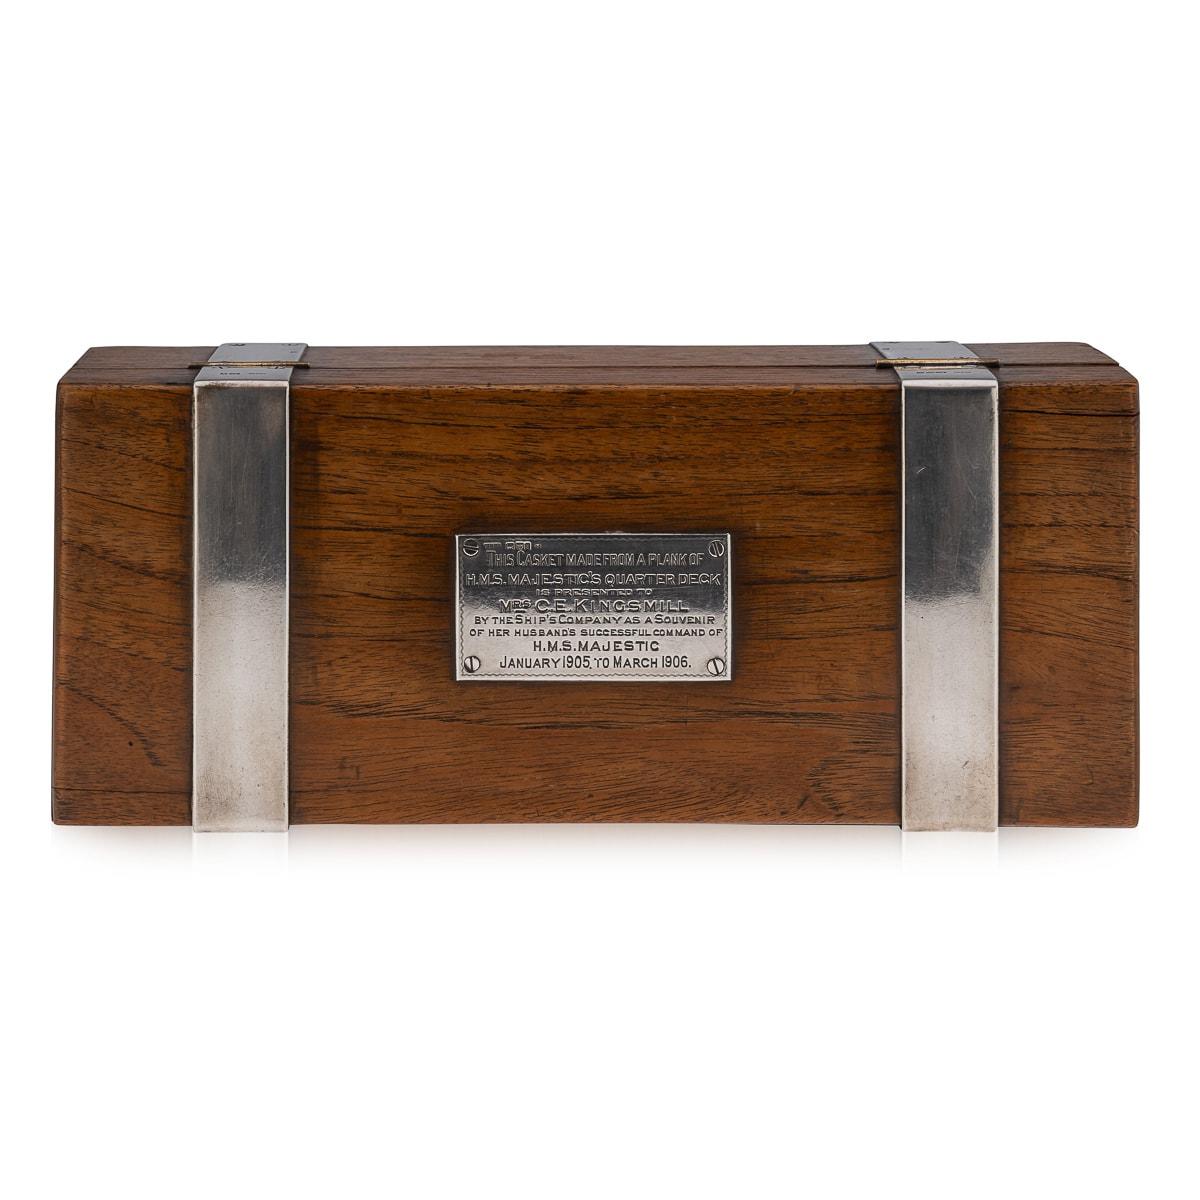 20th Century British Solid Silver & Wood 'H.M.S Majestic' Box, c.1905 For Sale 5